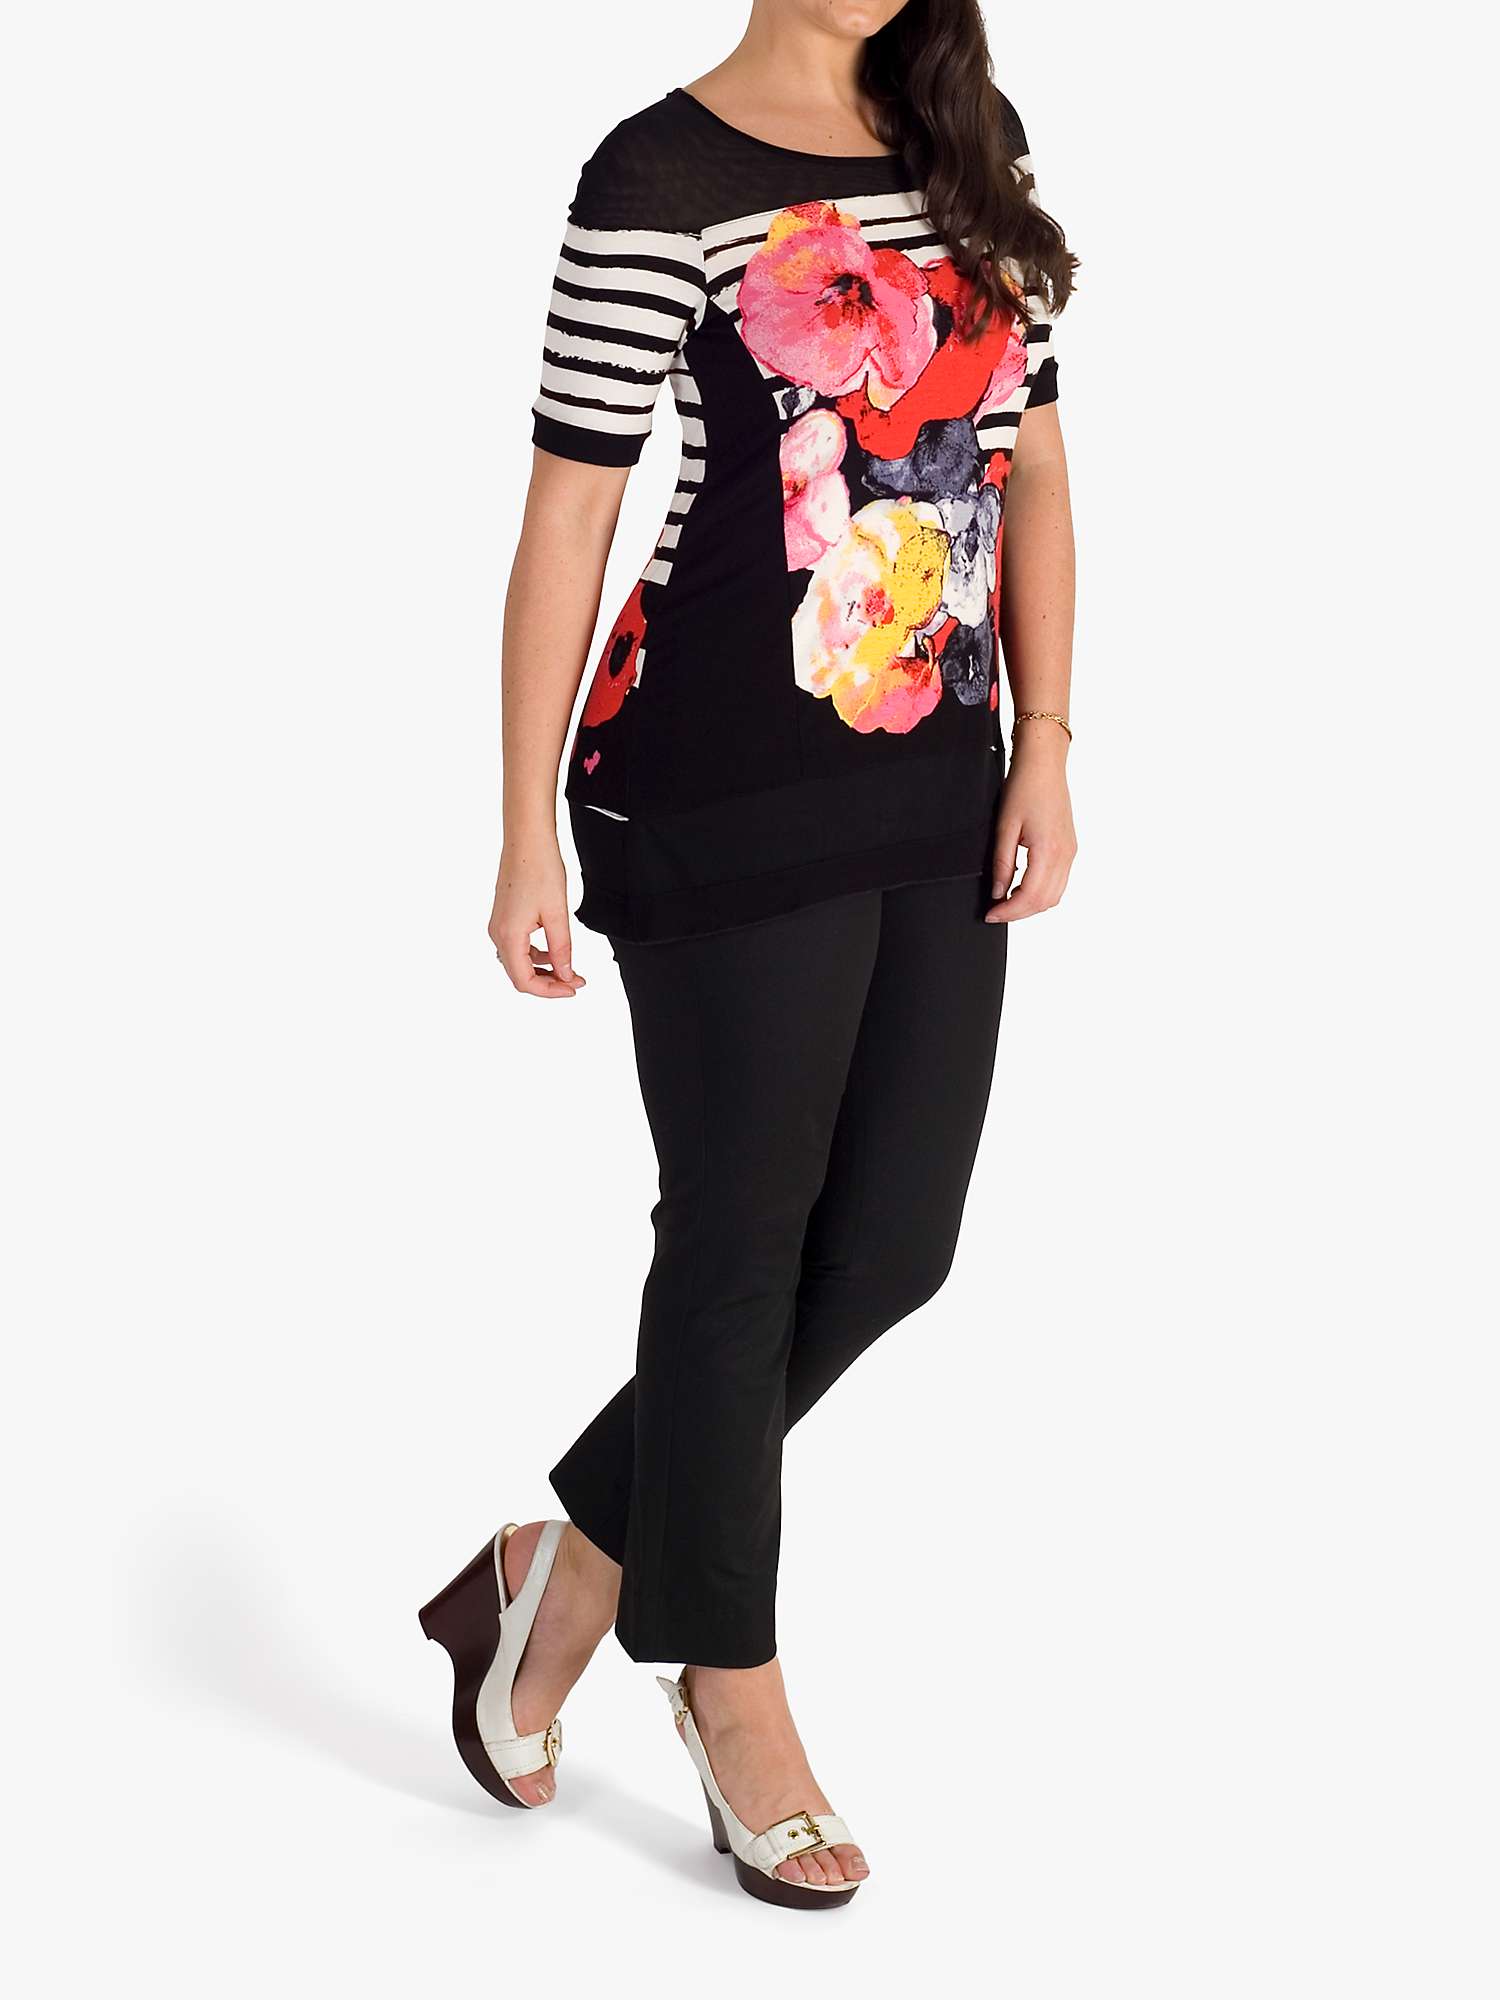 Buy chesca Floral and Stripe Mesh Trim Jersey Top, Black/Multi Online at johnlewis.com